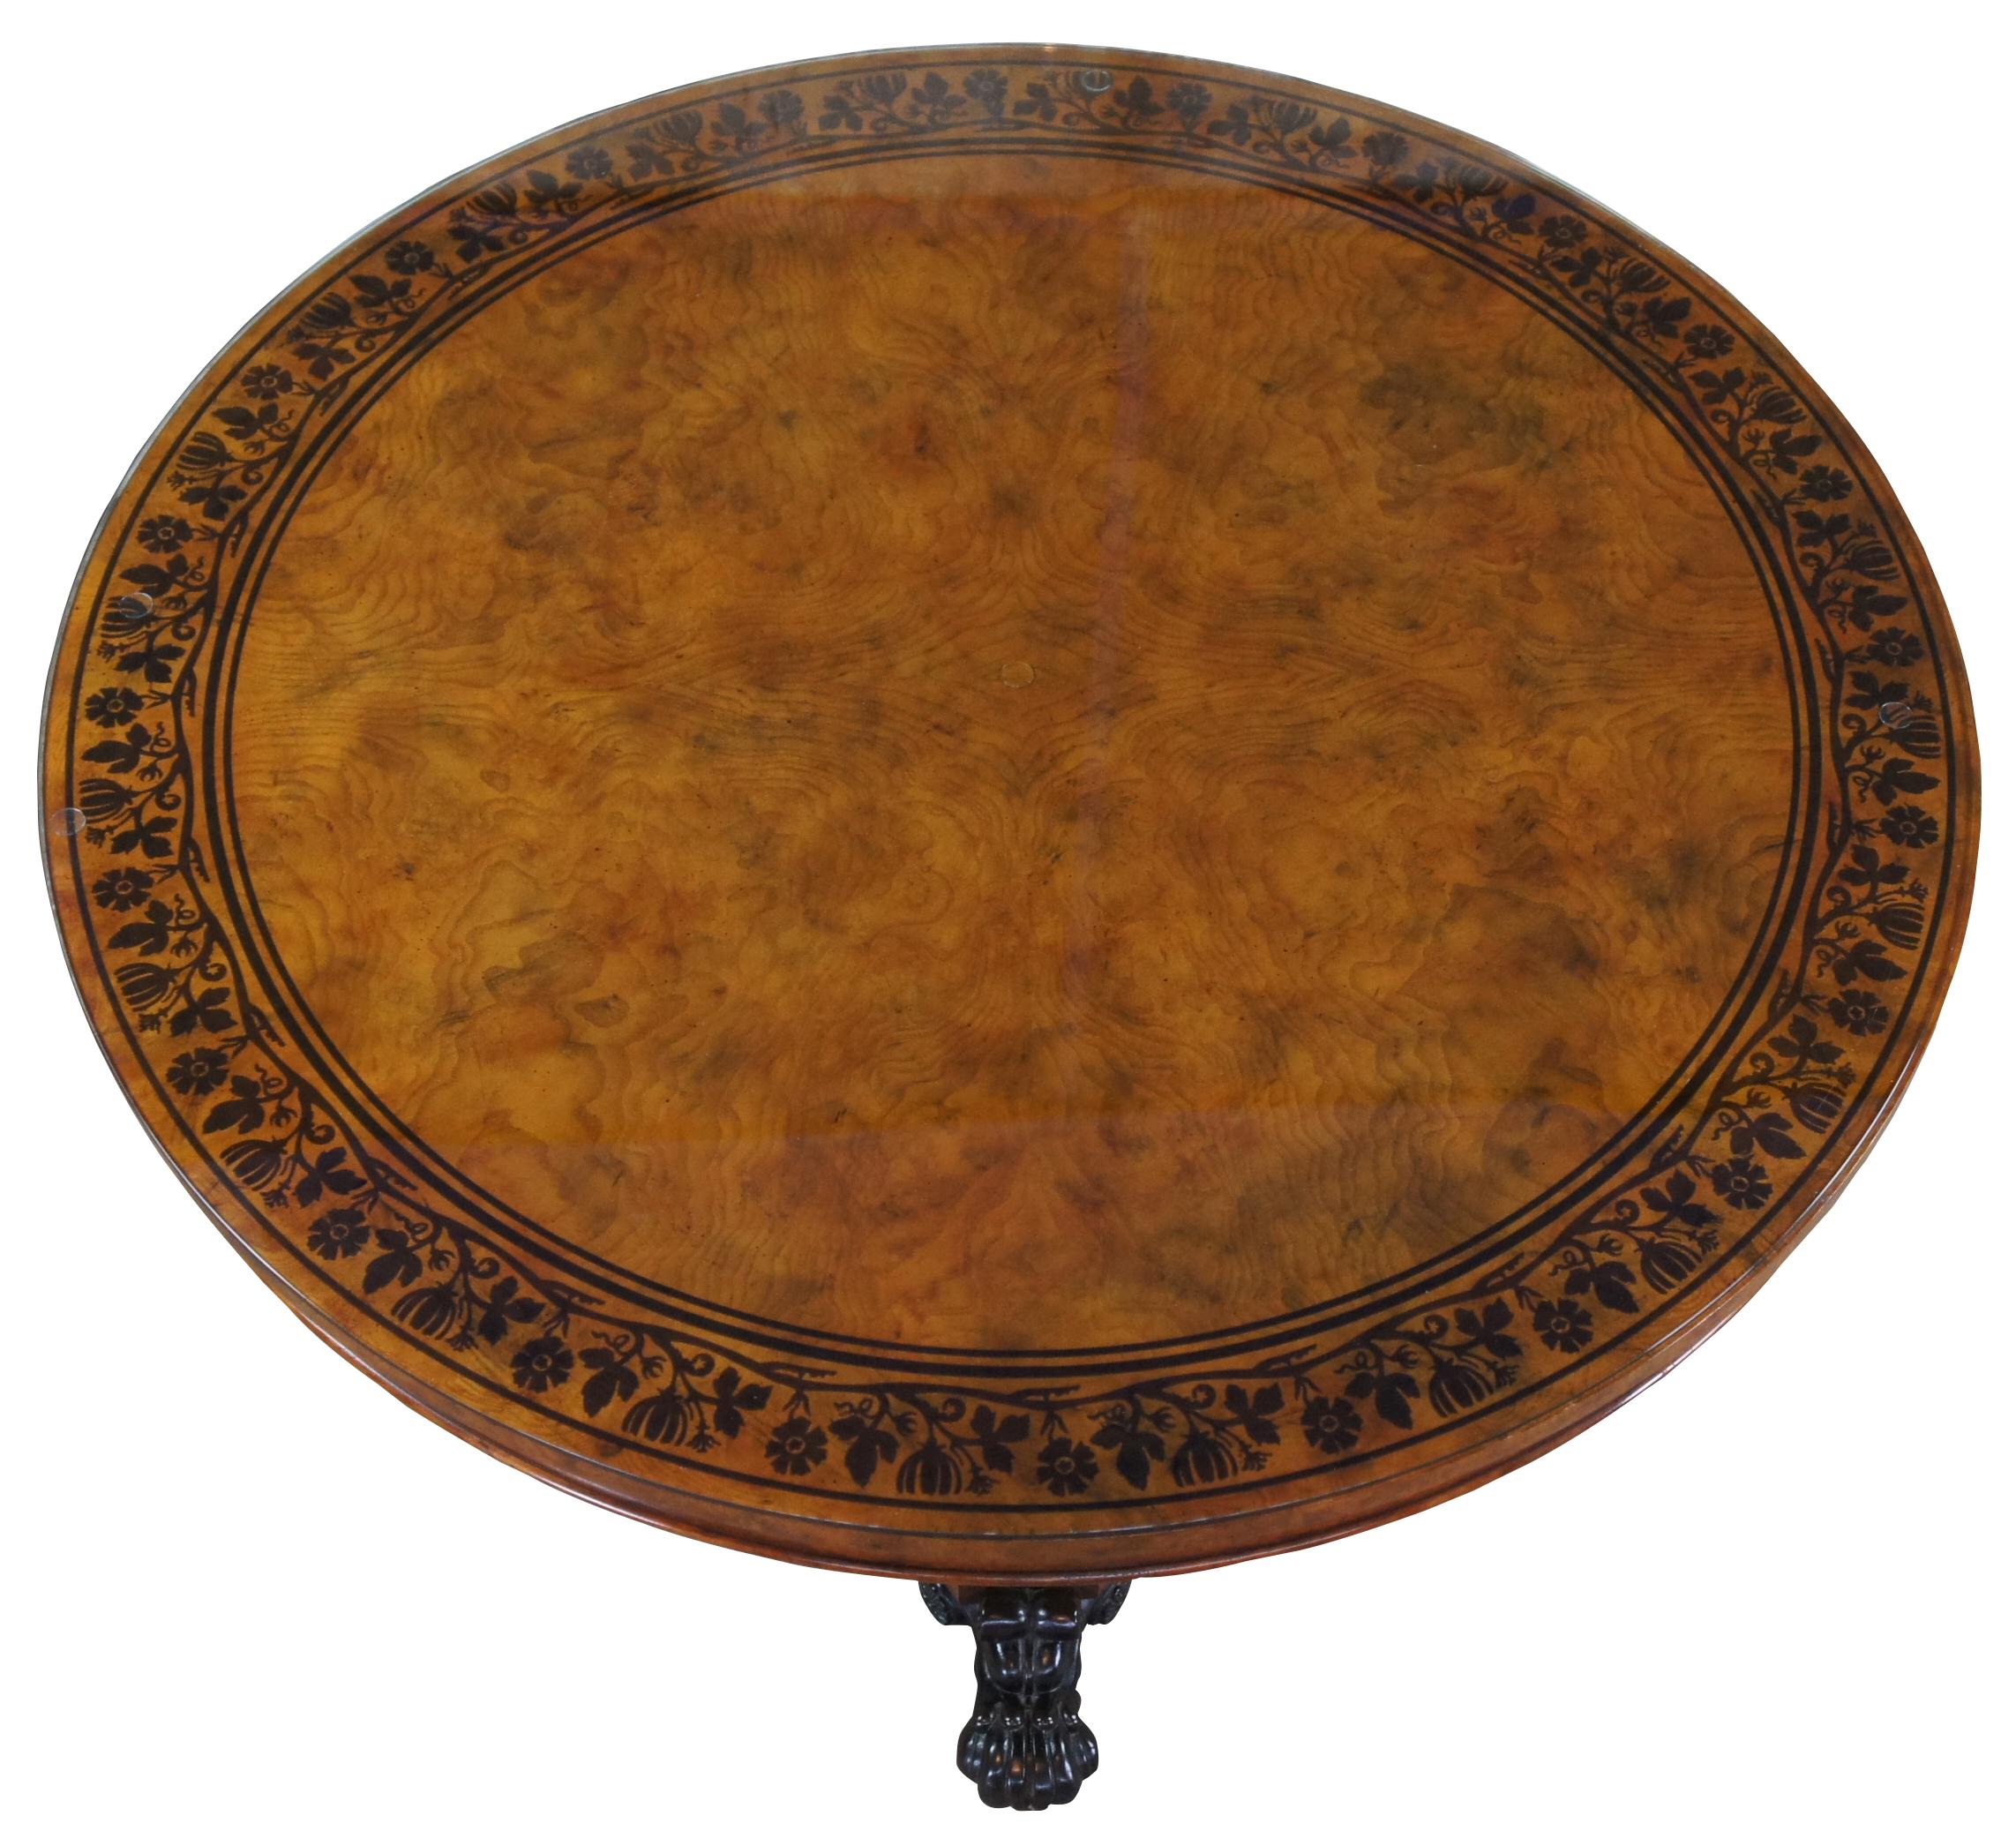 The Regency centre table, a rare piece, was designed in circular or round burr ash by George Bullock. Adorning the inlaid top is a broad border of ebonized floral vines within ebonized bands. The frieze follows suit with ebonized mouldings above a